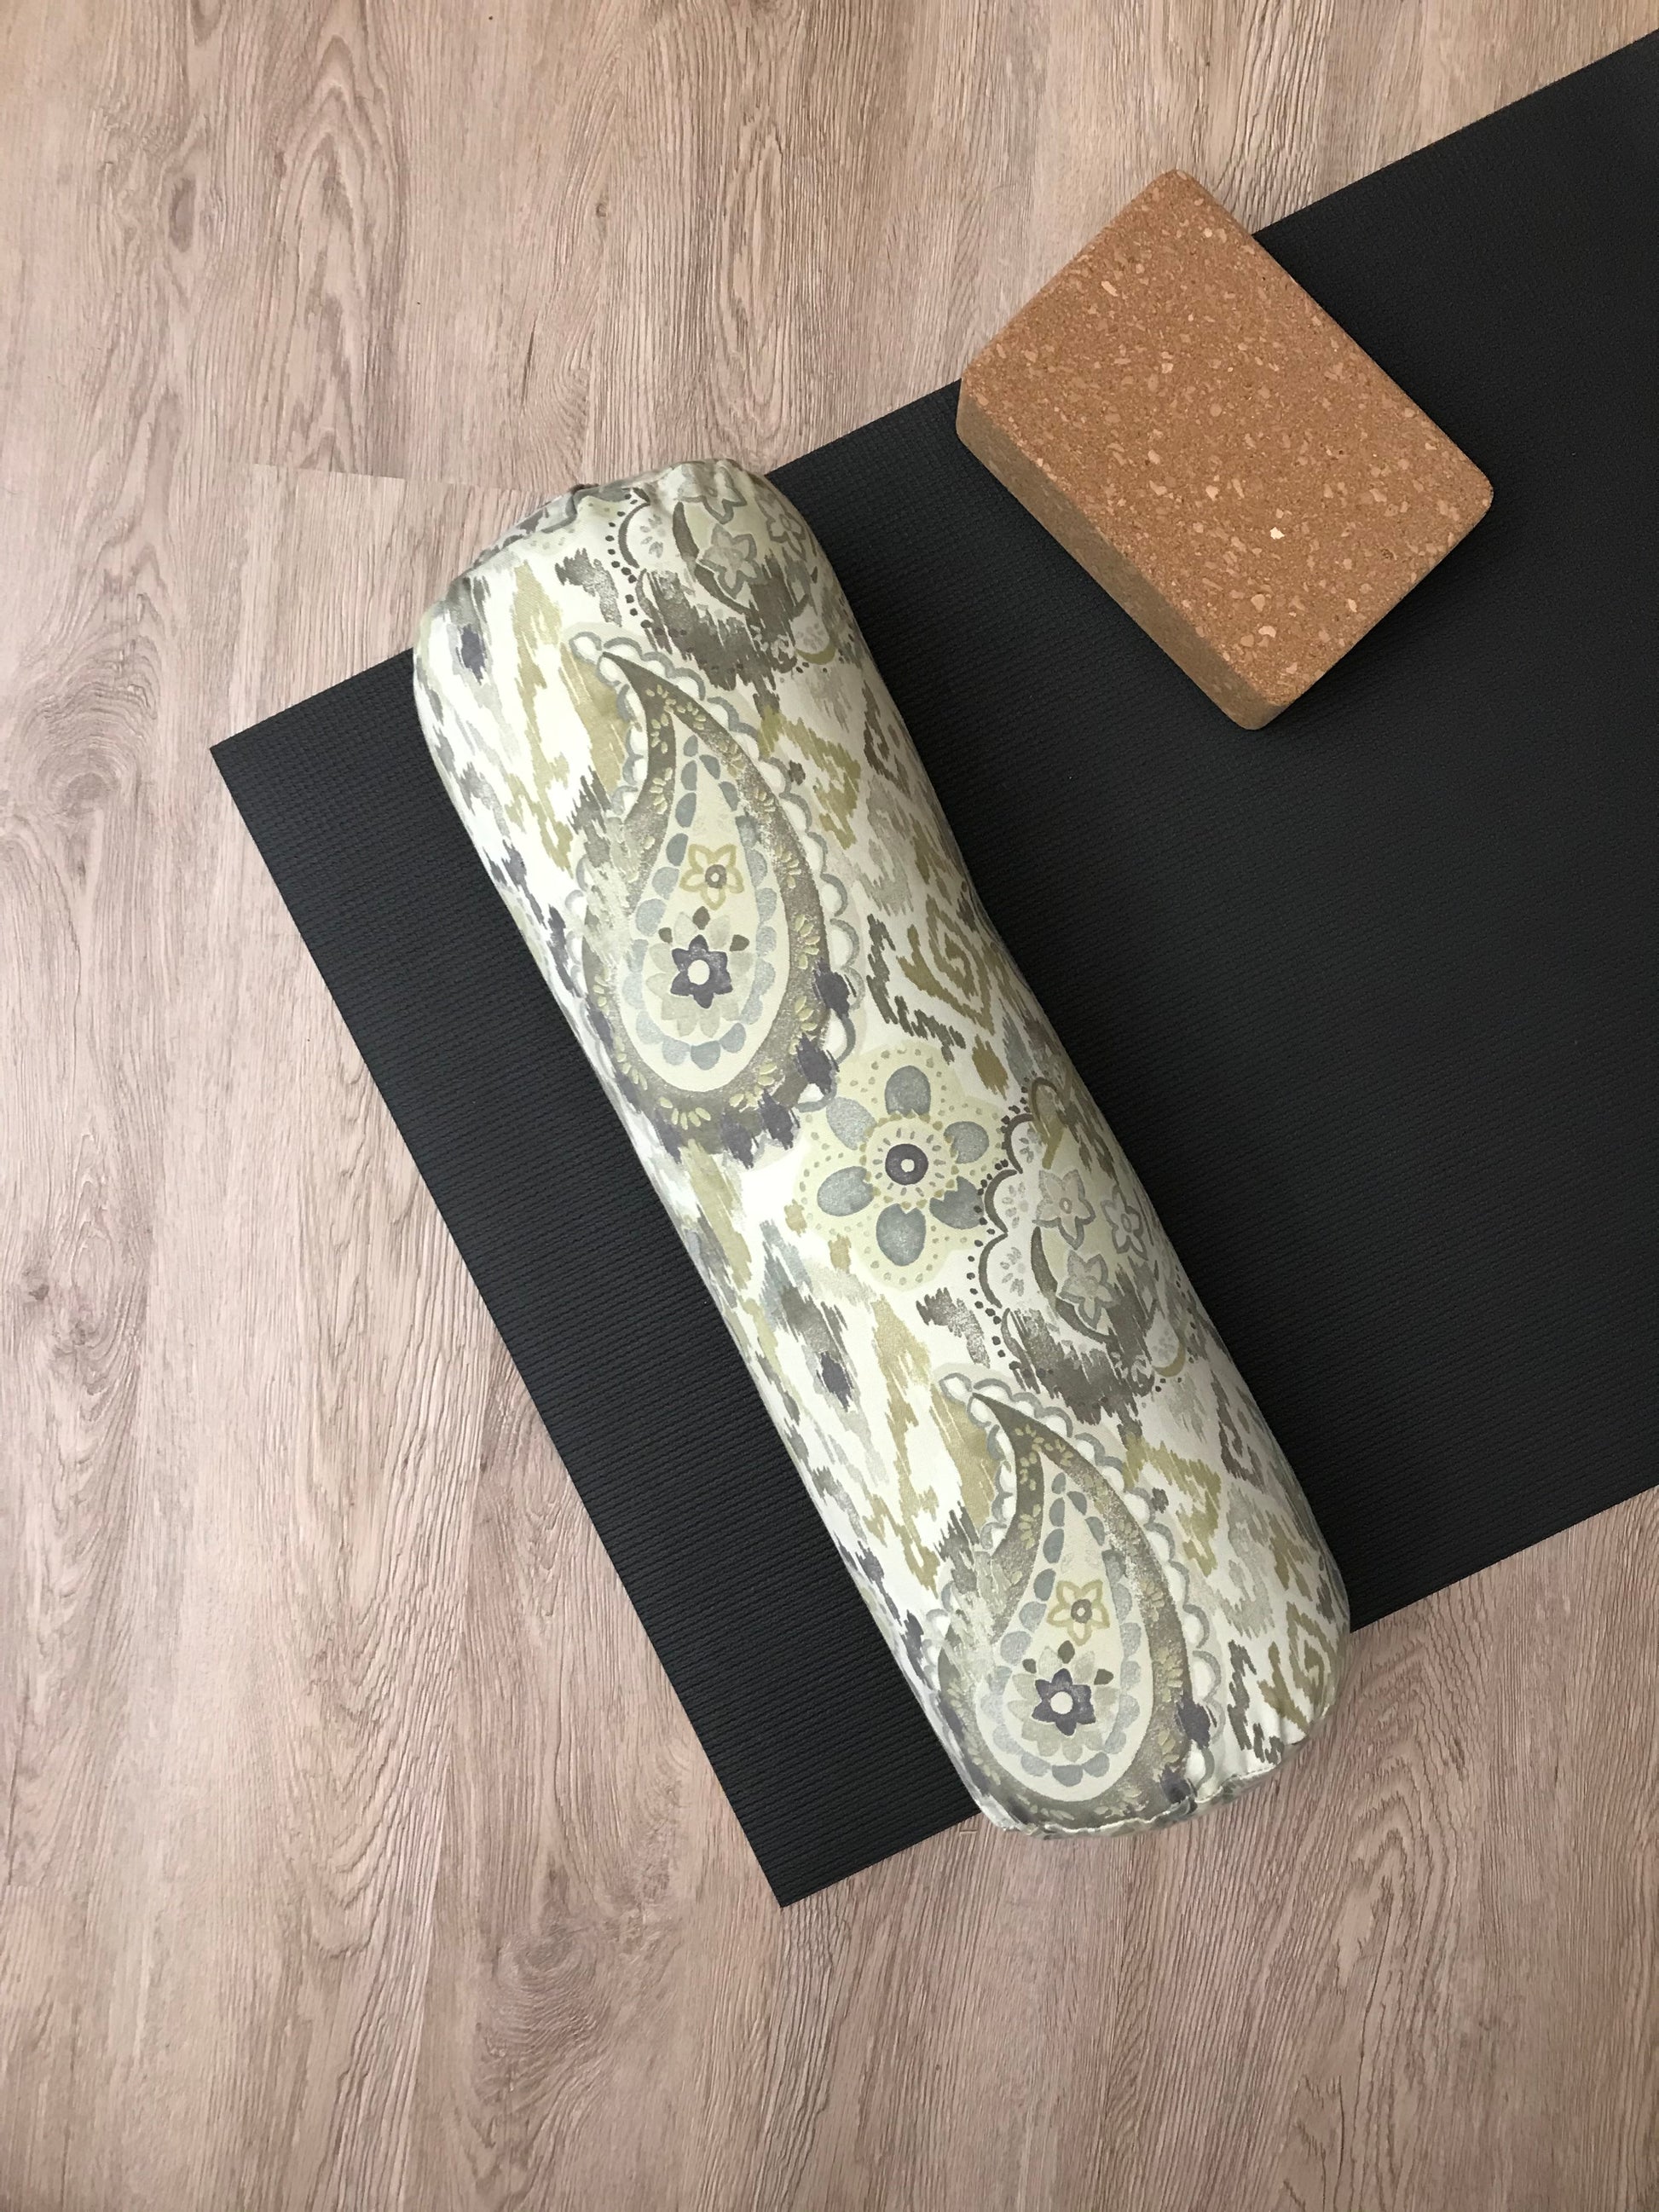 Round yoga bolster in cotton canvas fabric, paisley graphic in sage and beige fabric. Allergy conscious fill with removeable cover. Made in Canada by My Yoga Room Elements